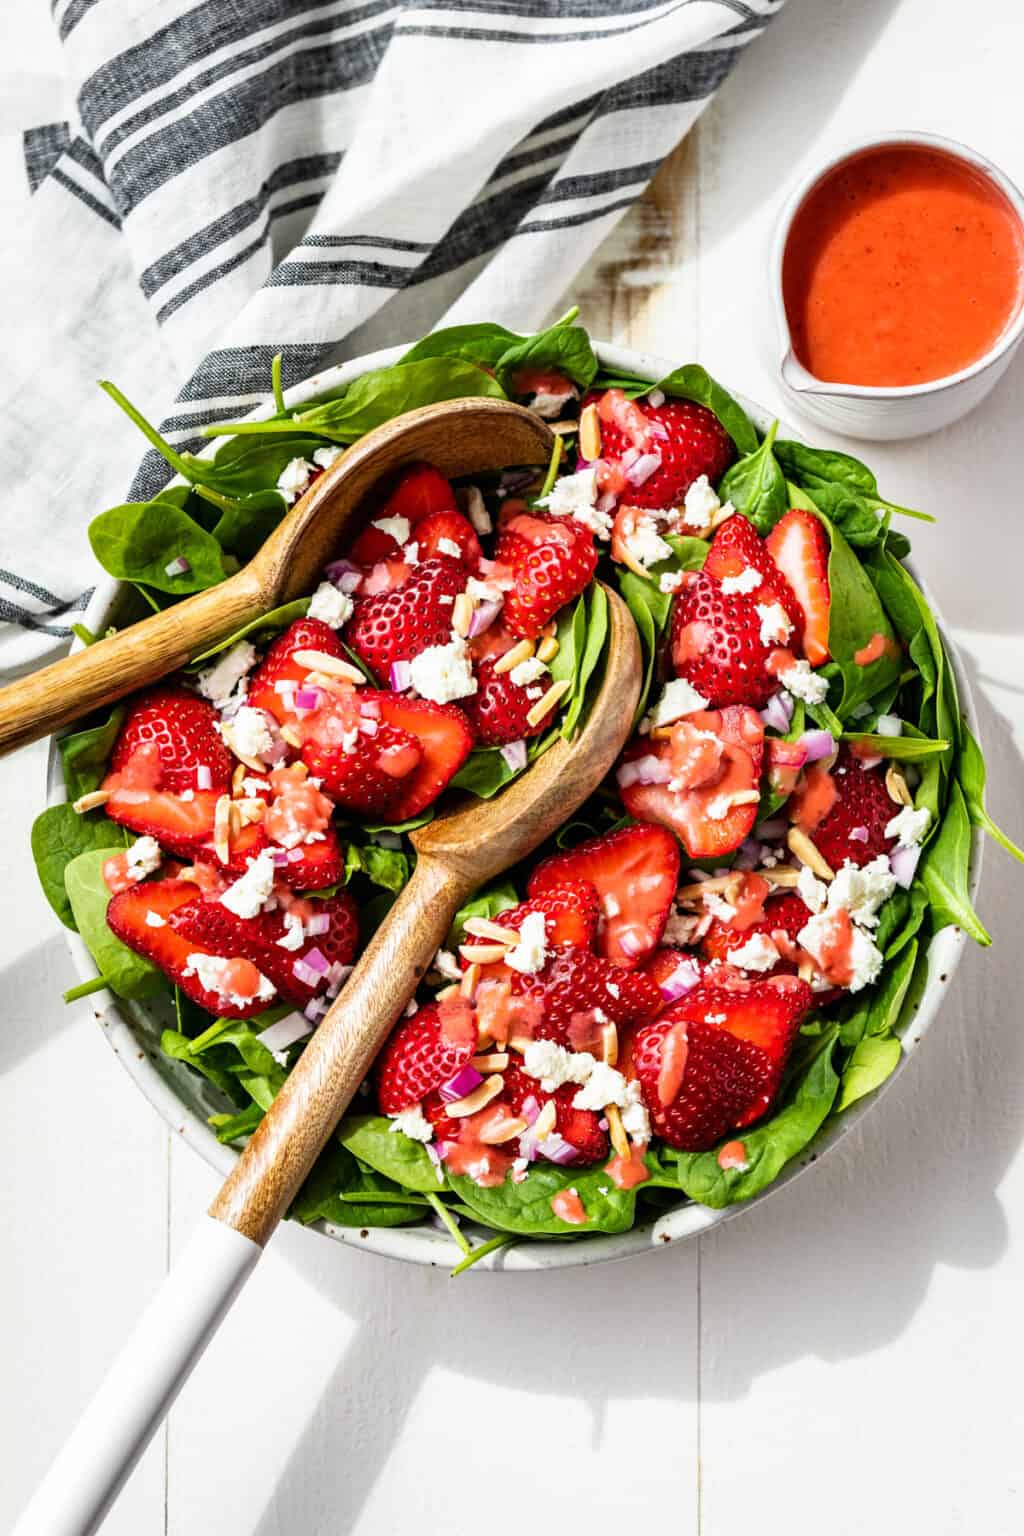 Strawberry Spinach Salad (4 dressings) Get Inspired Everyday!